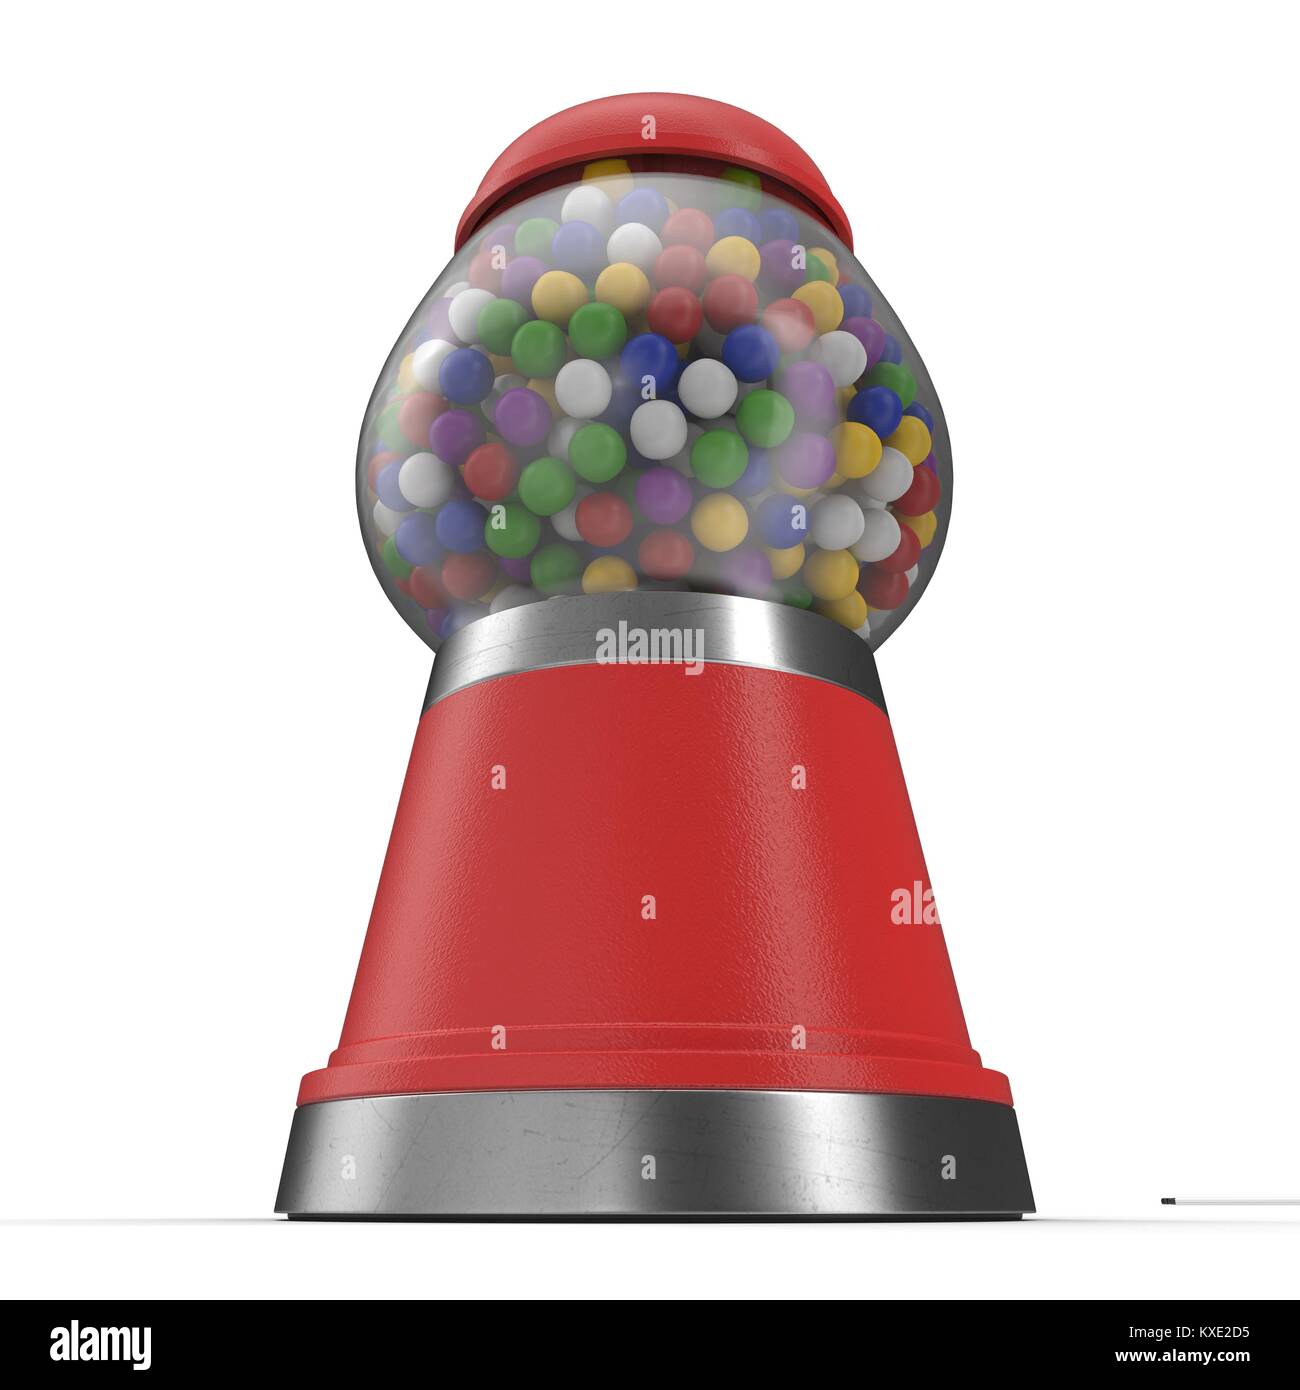 Carousel Gumball Machine Bank Stock Photo - Download Image Now